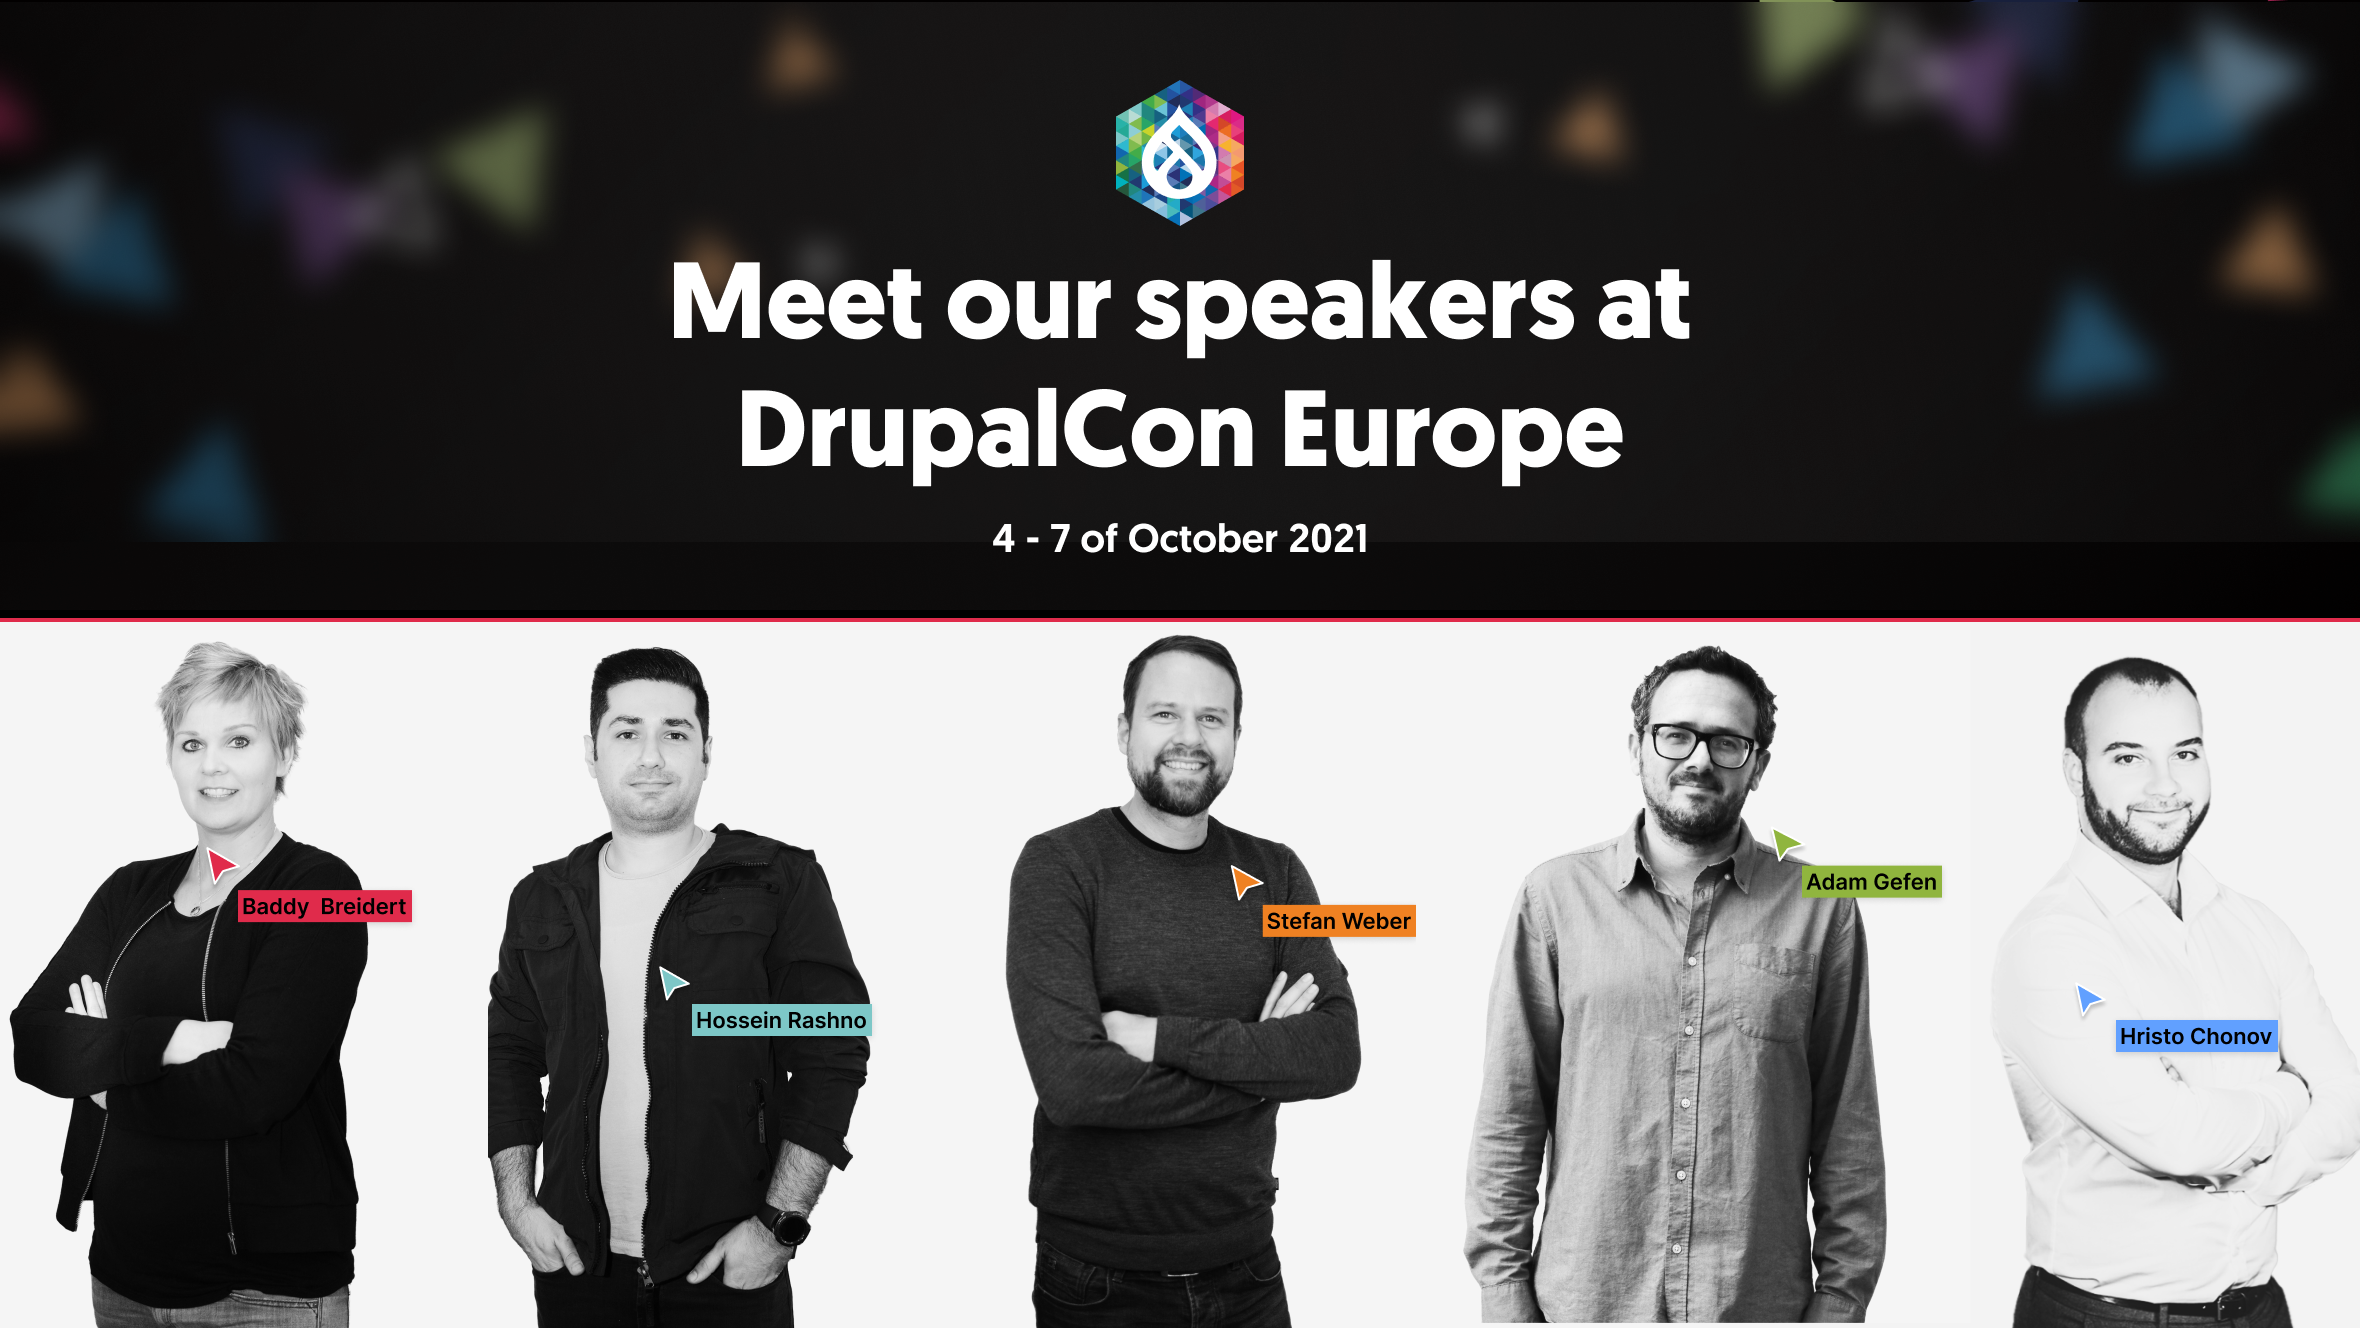 Meet our speakers at DrupalCon Europe